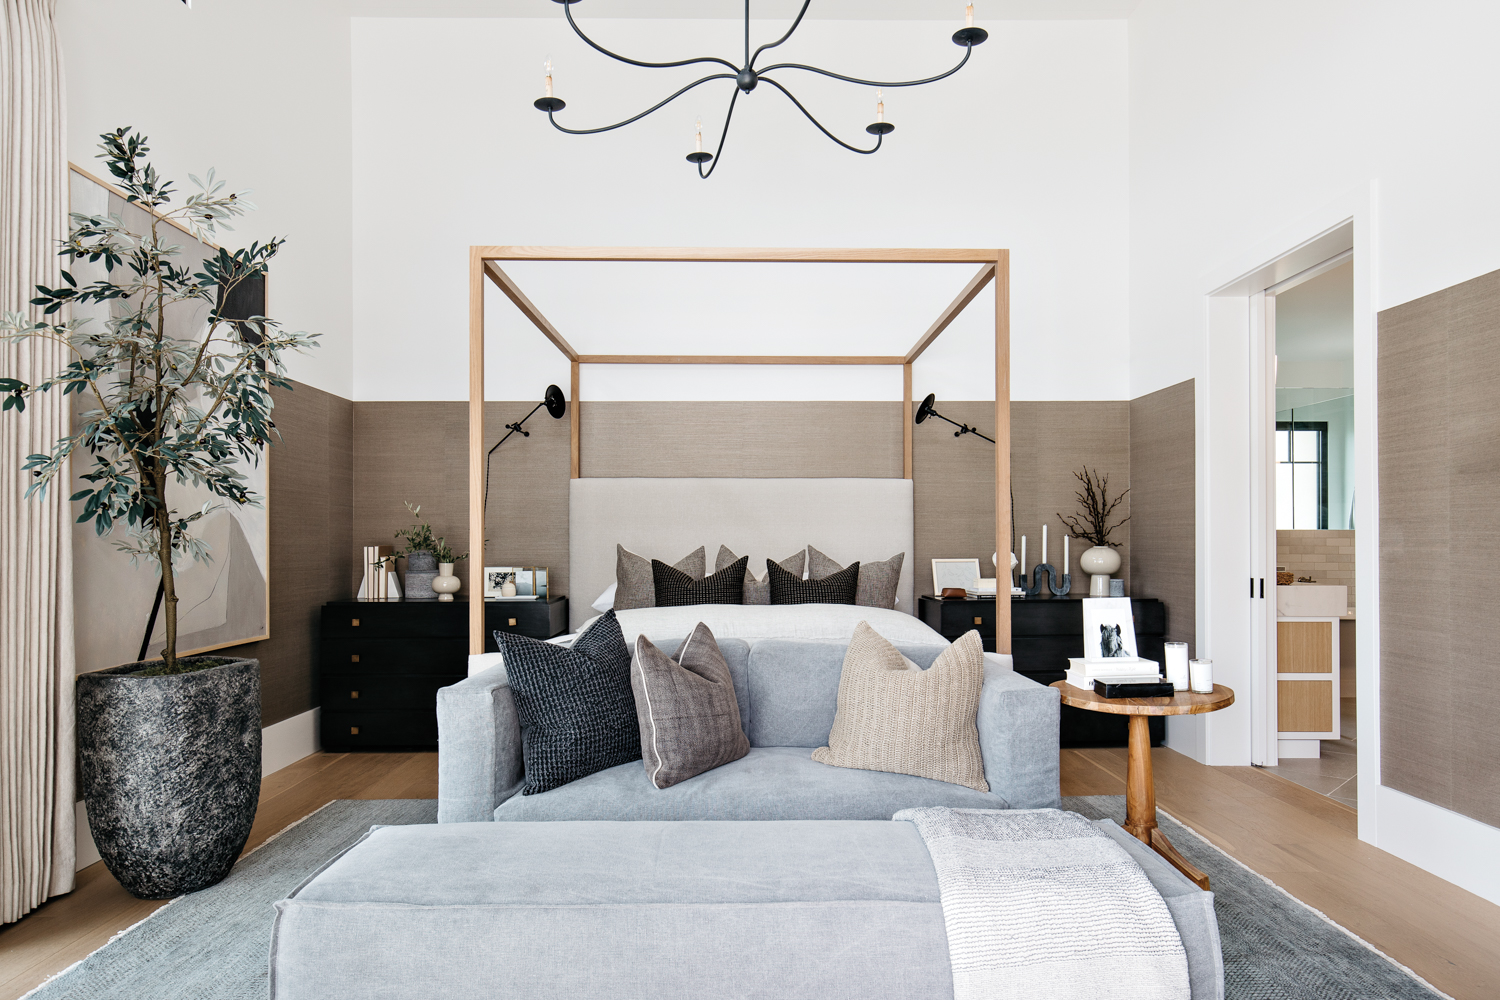 A gray-and-white main bedroom with...